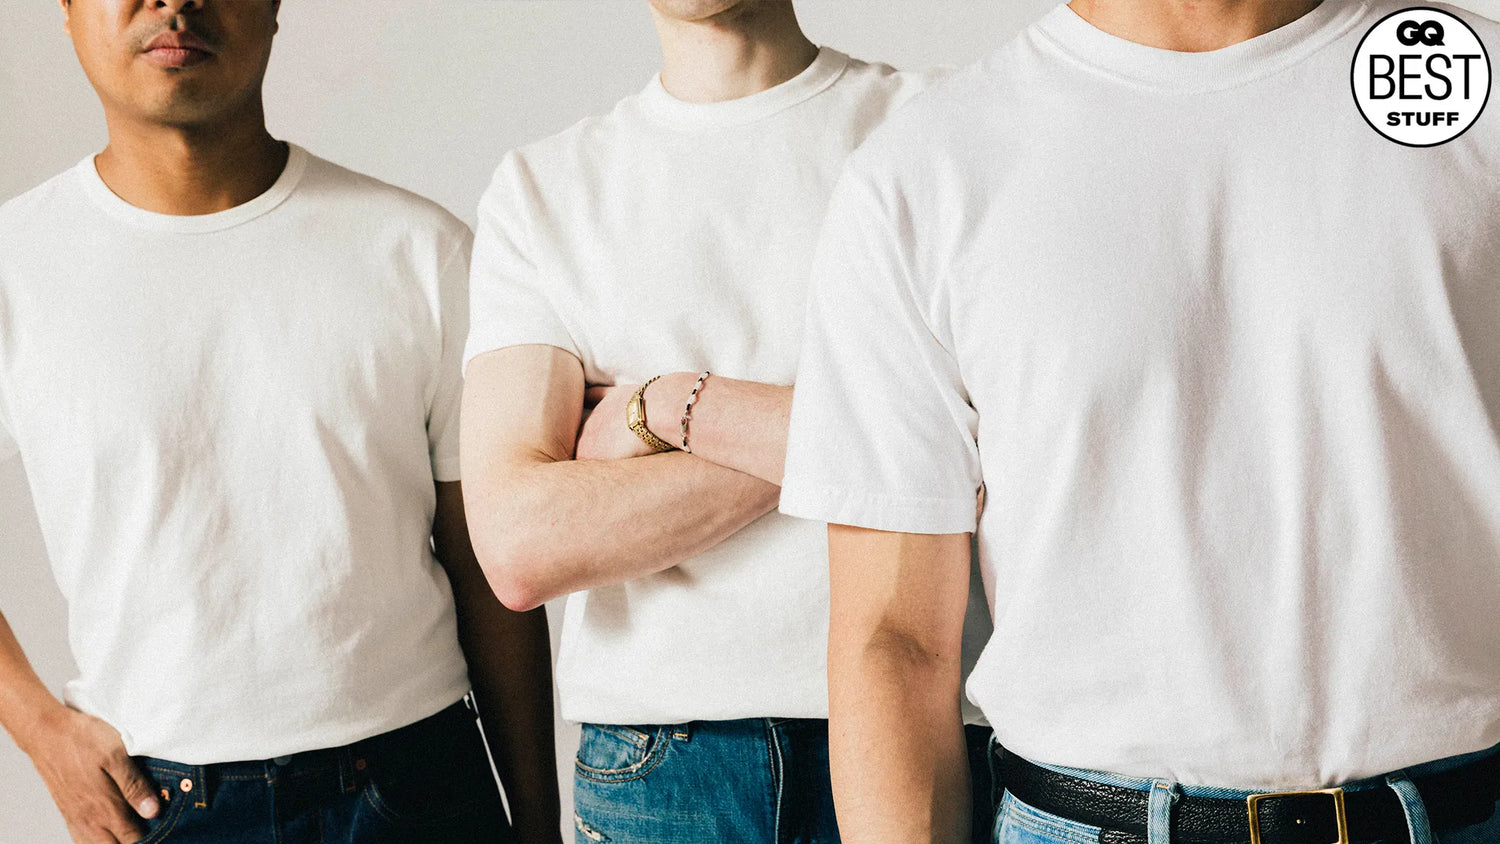 Men's Essential T-Shirt Collection: Premium Cotton Tops for Every Style